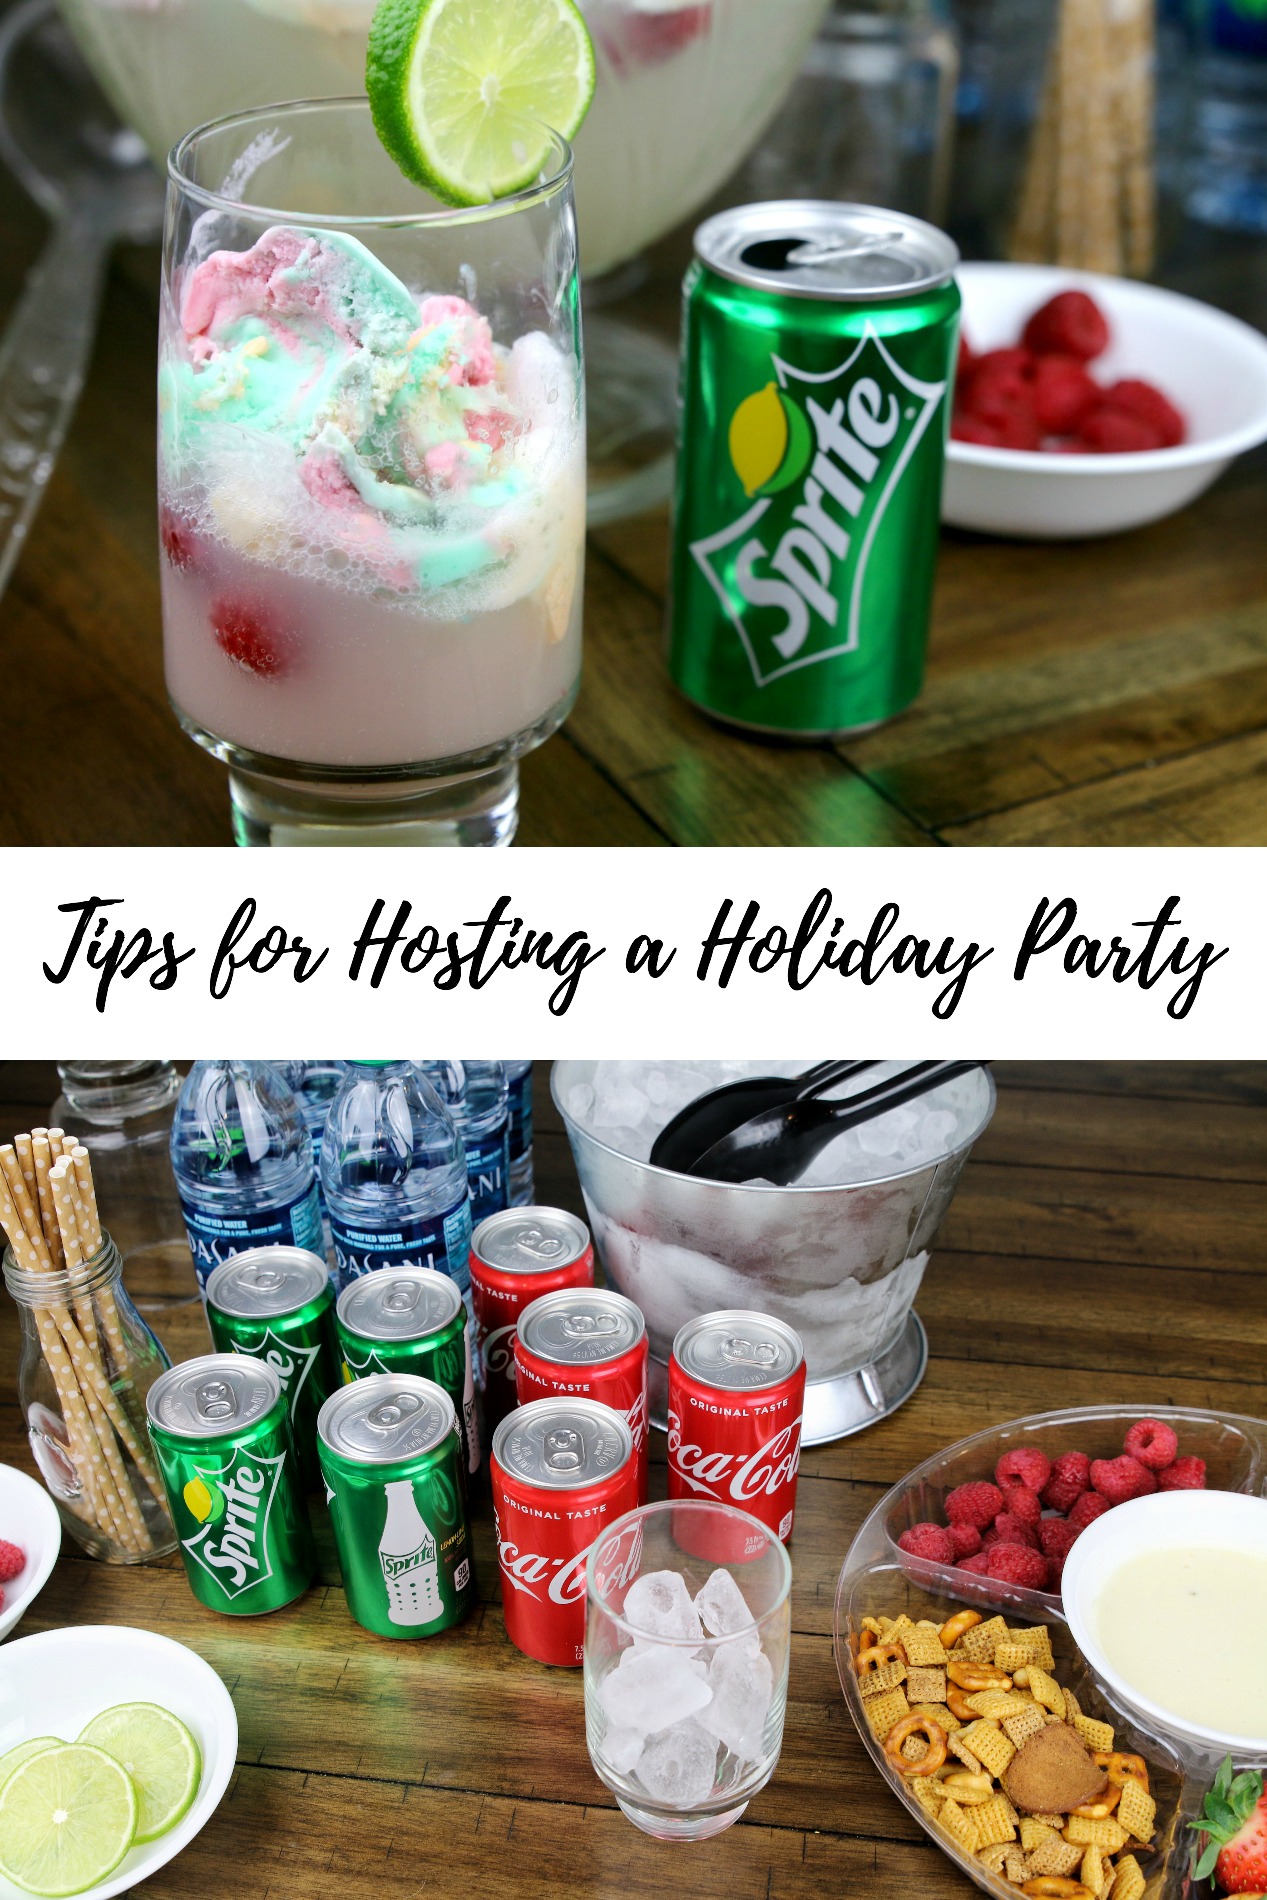 Tips for Hosting a Holiday Party